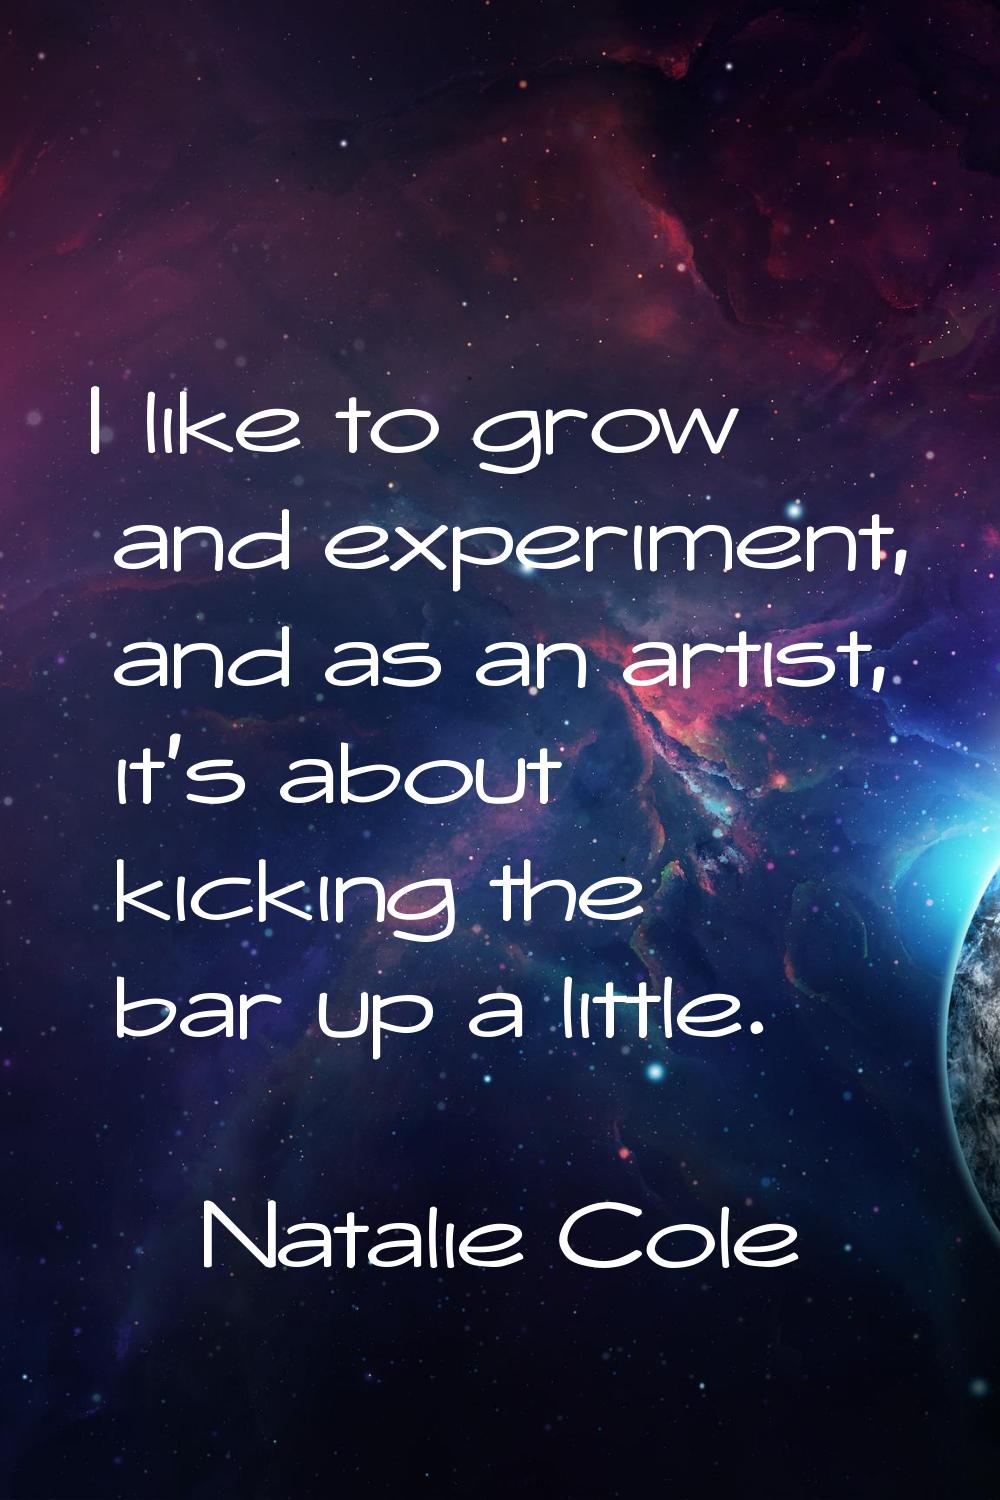 I like to grow and experiment, and as an artist, it's about kicking the bar up a little.